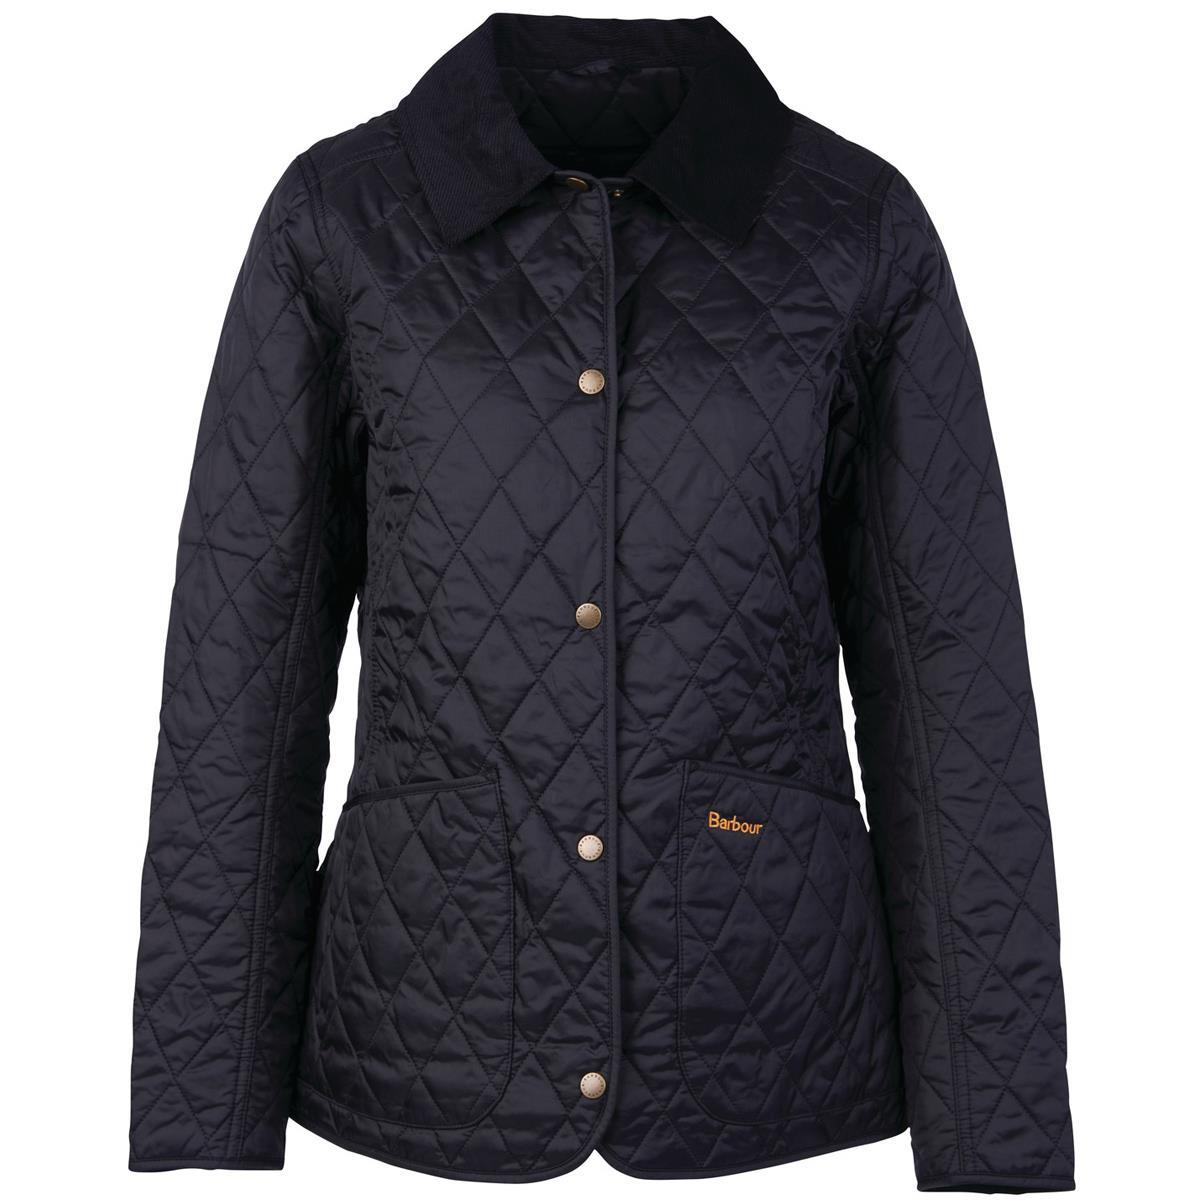 What colors & sizes does the Barbour Annandale Quilted Jacket come in?